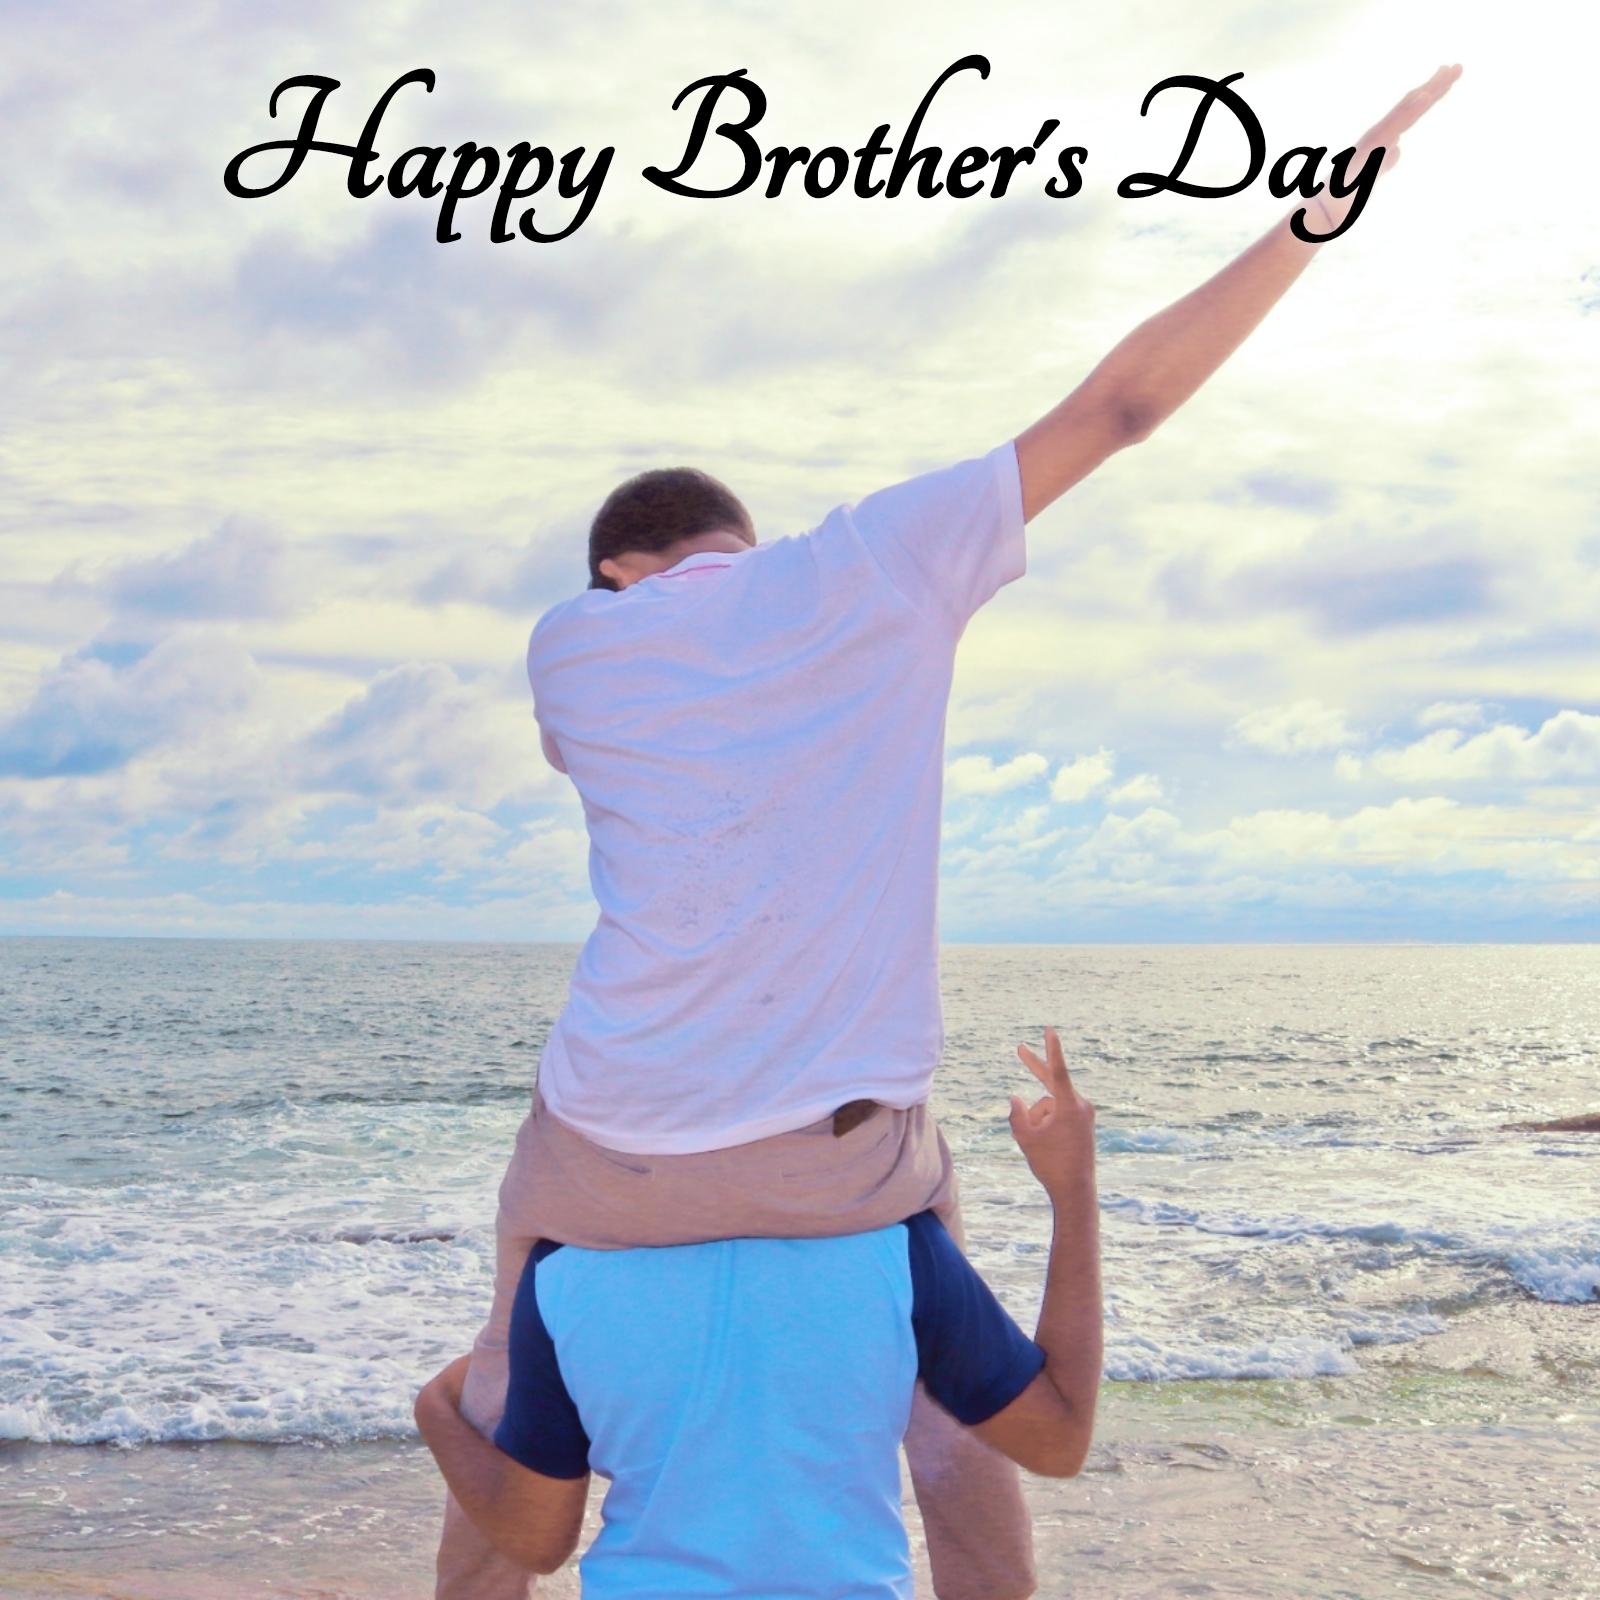 Happy Brothers Day Card Images